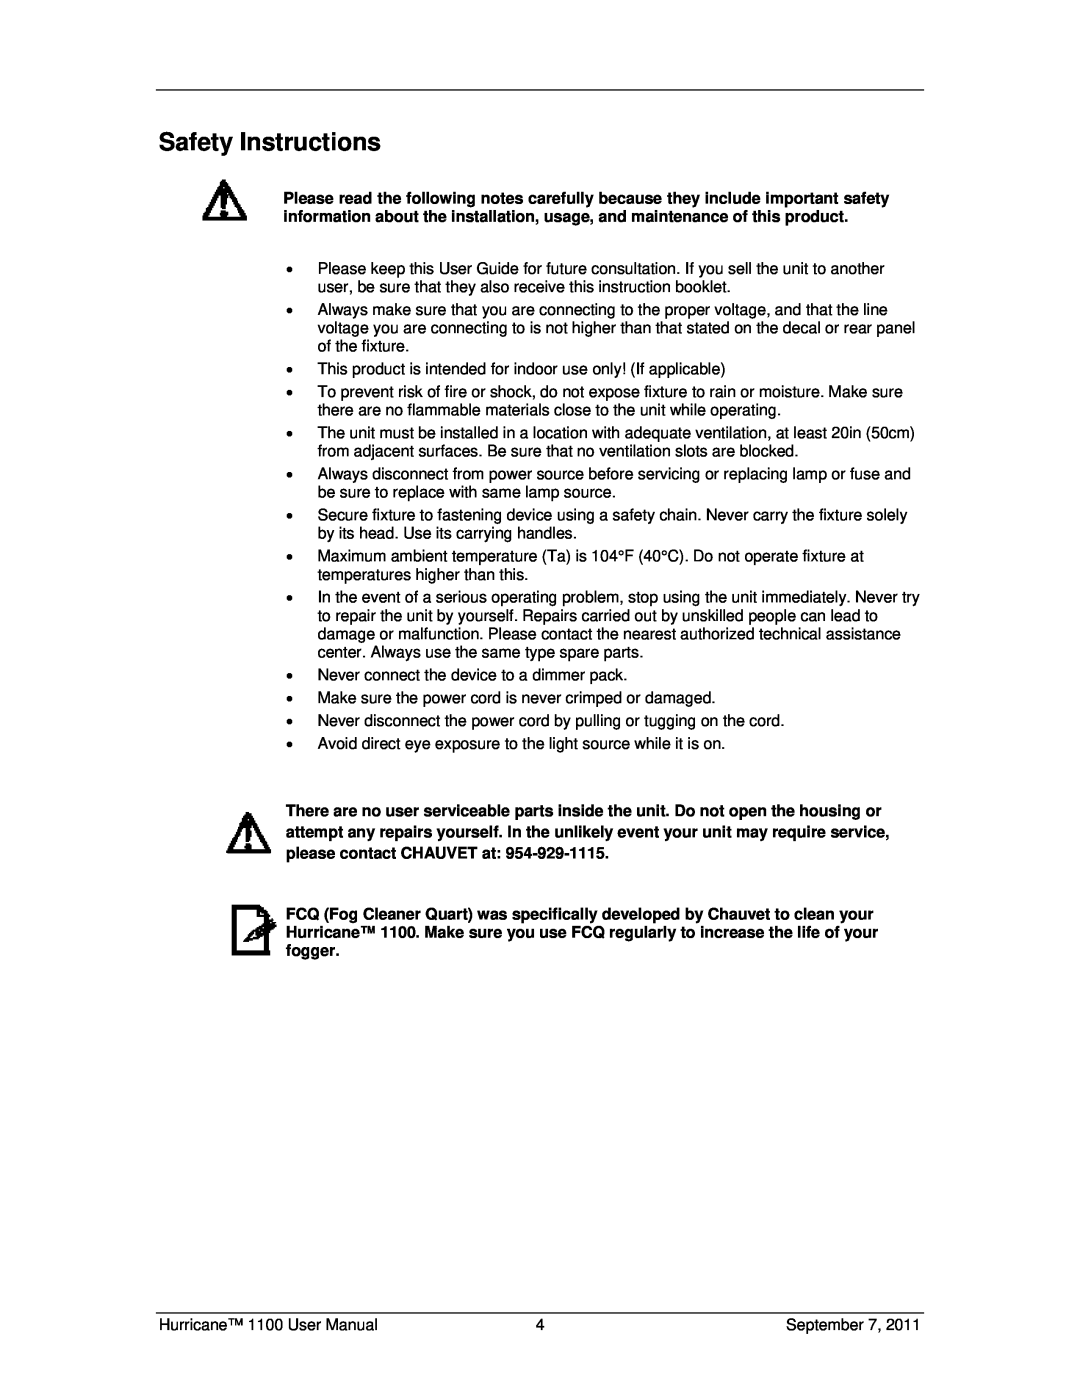 Chauvet 1100 user manual Safety Instructions 